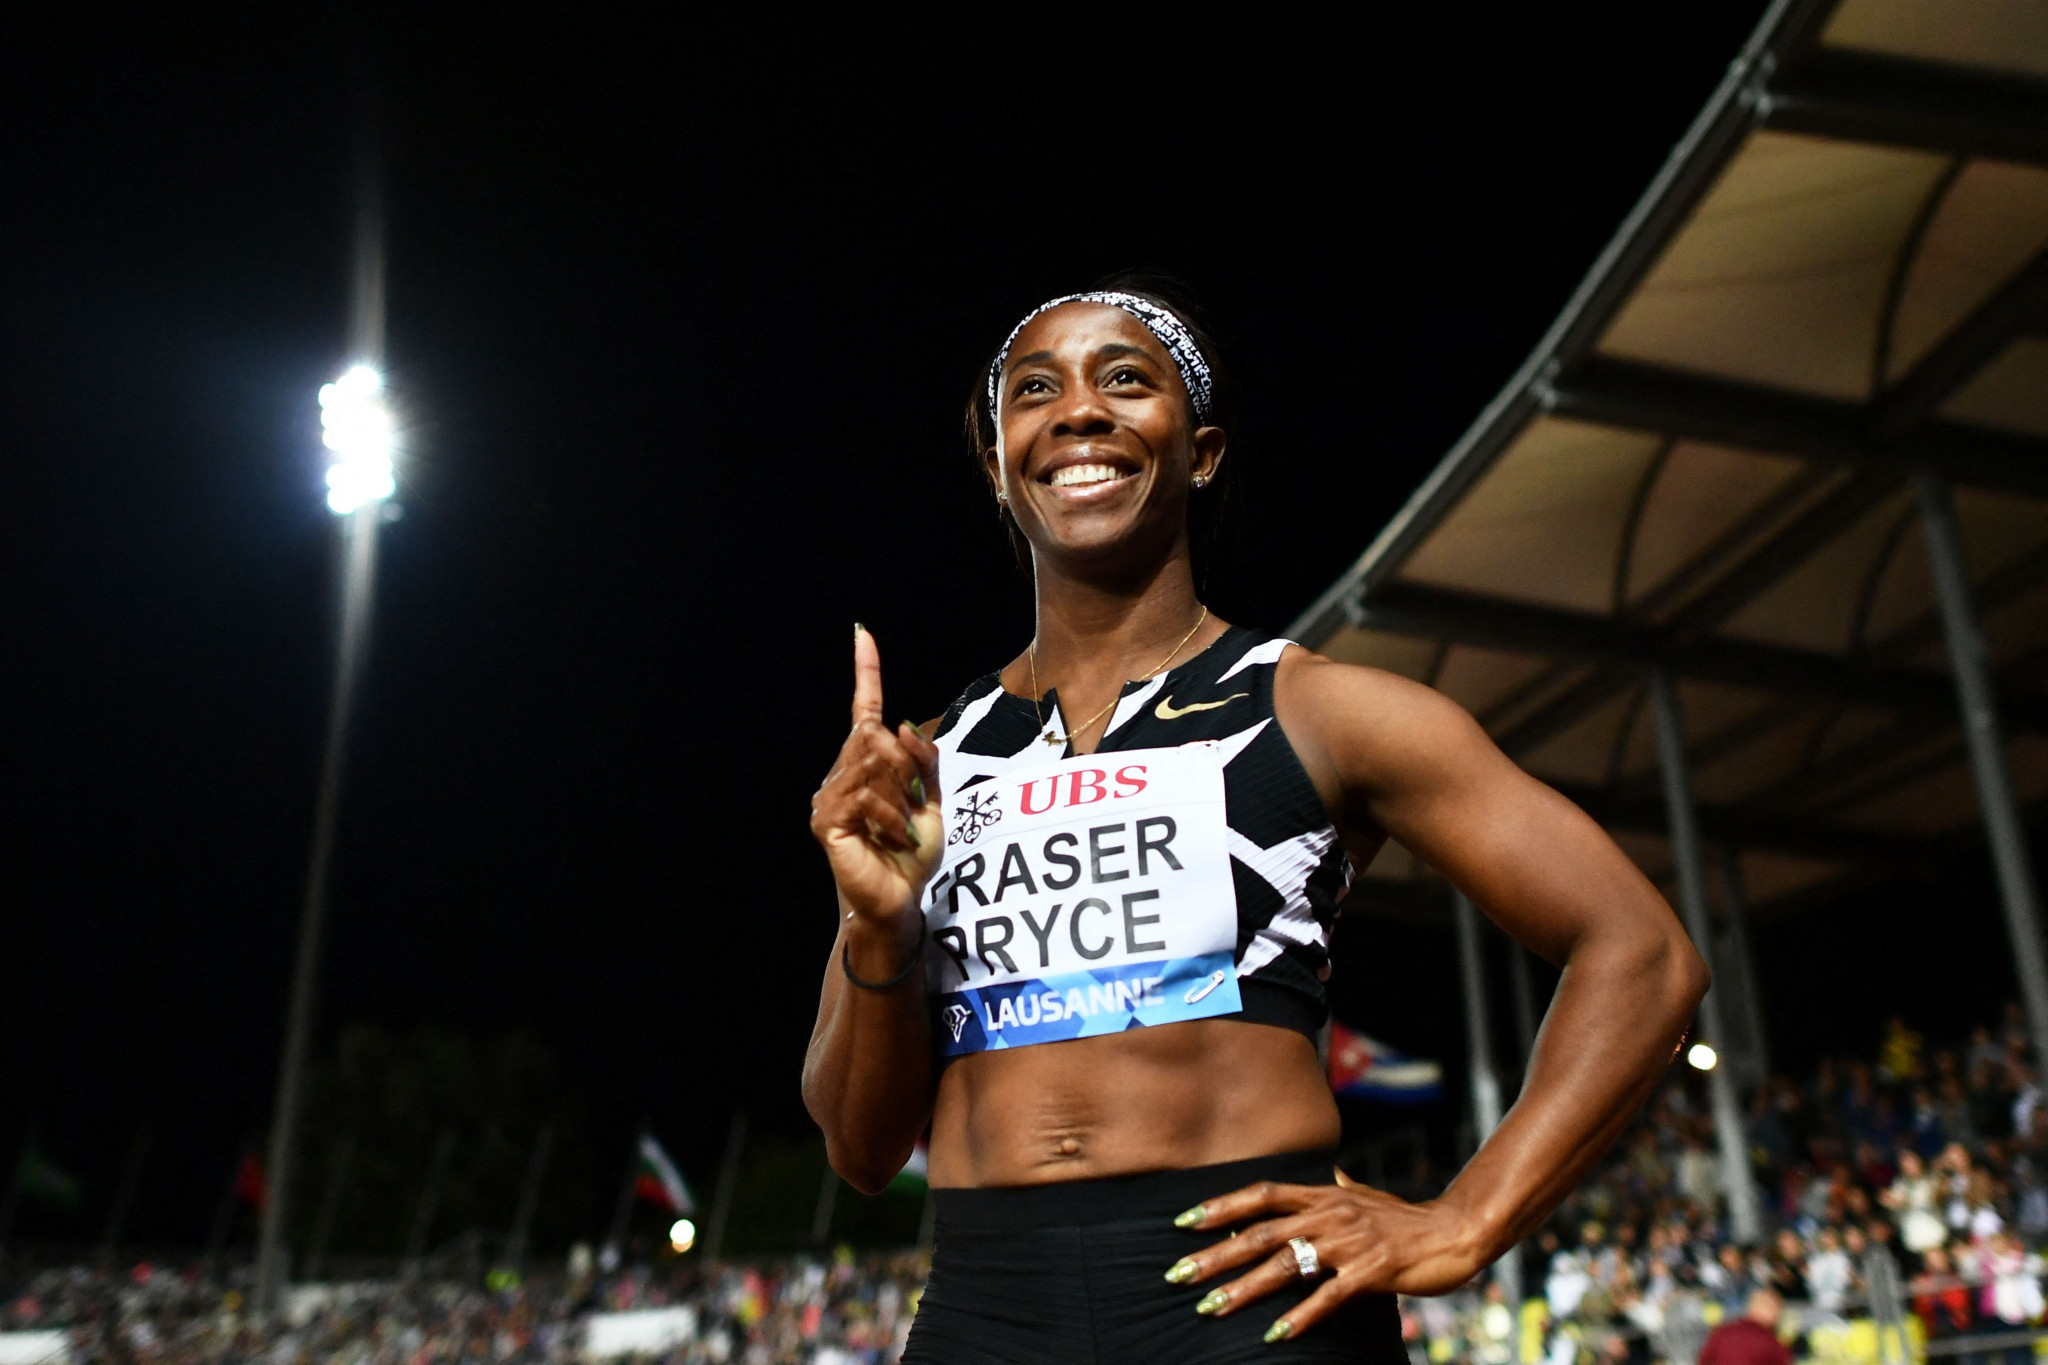 Eight-time Olympic medallist Fraser-Pryce eyes Paris 2024 at 37 years of age